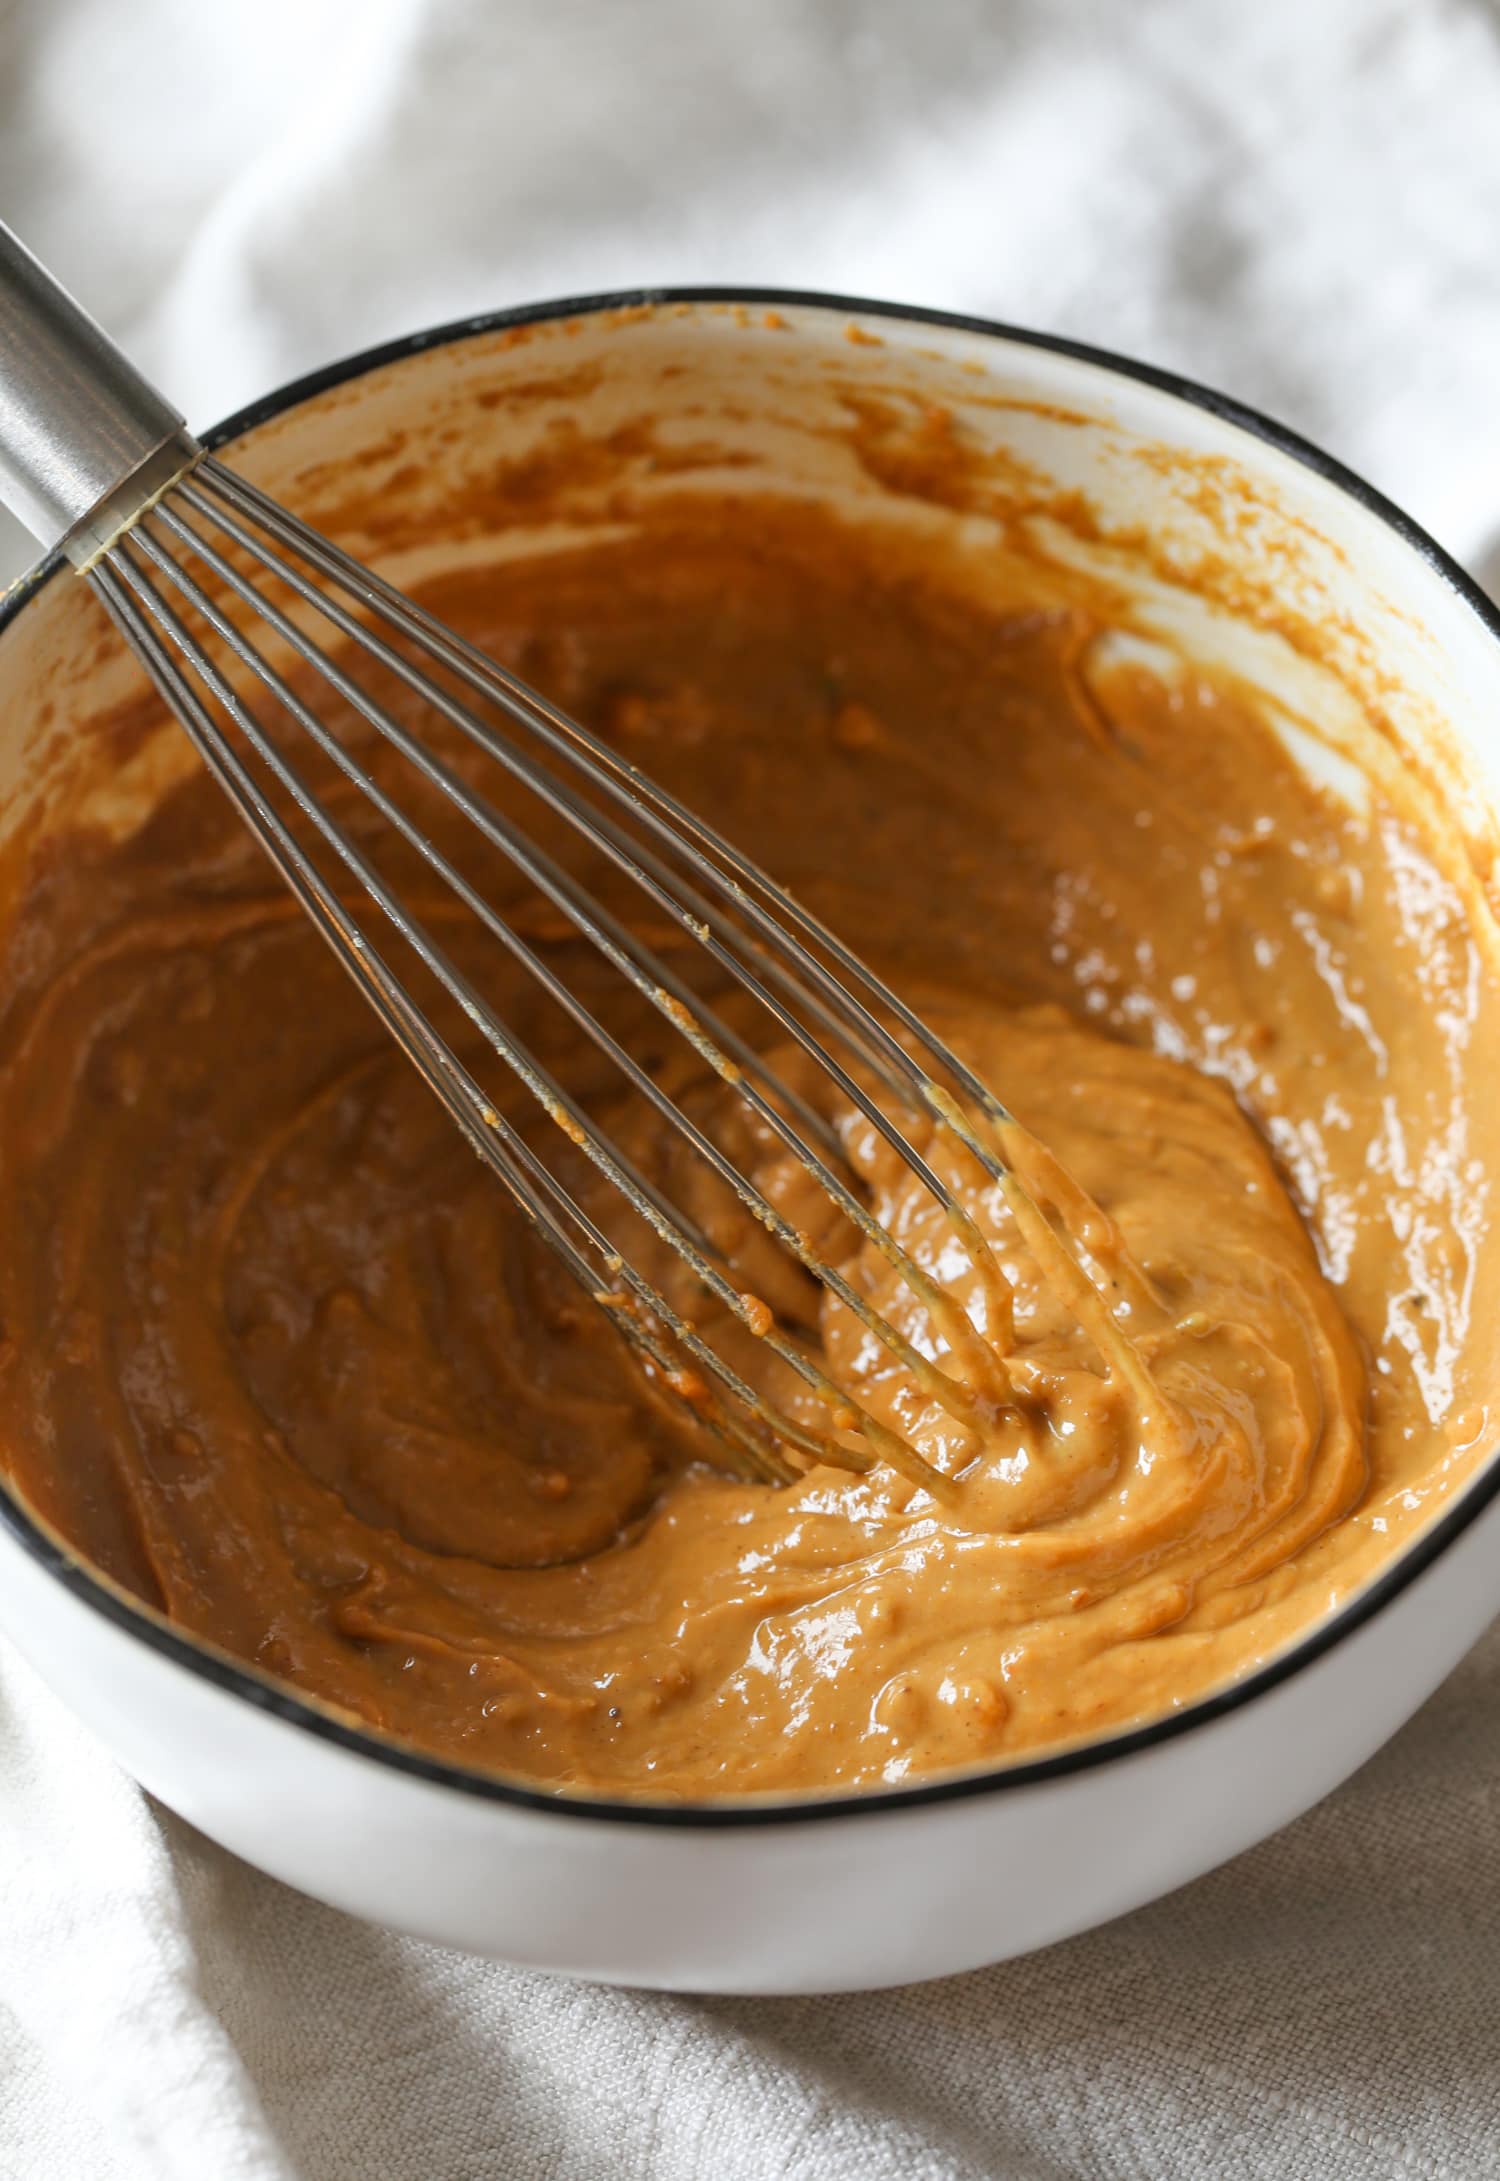 Peanut butter, lime juice, soy sauce, chili and spices are whisked together for the homemade peanut sauce.